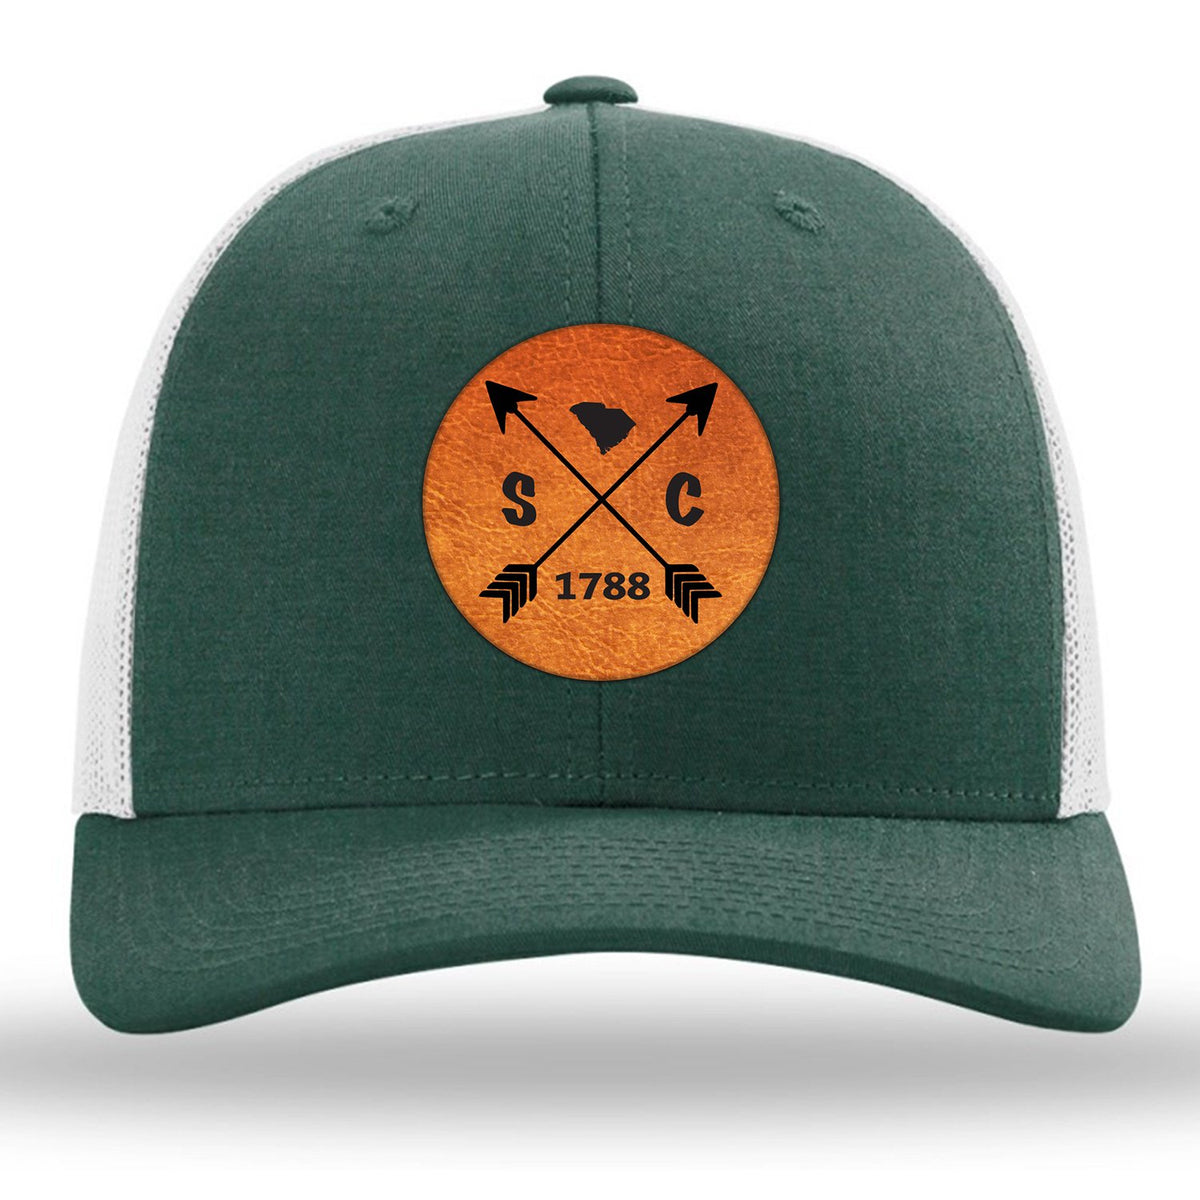 South Carolina State Arrows - Leather Patch Trucker Hat